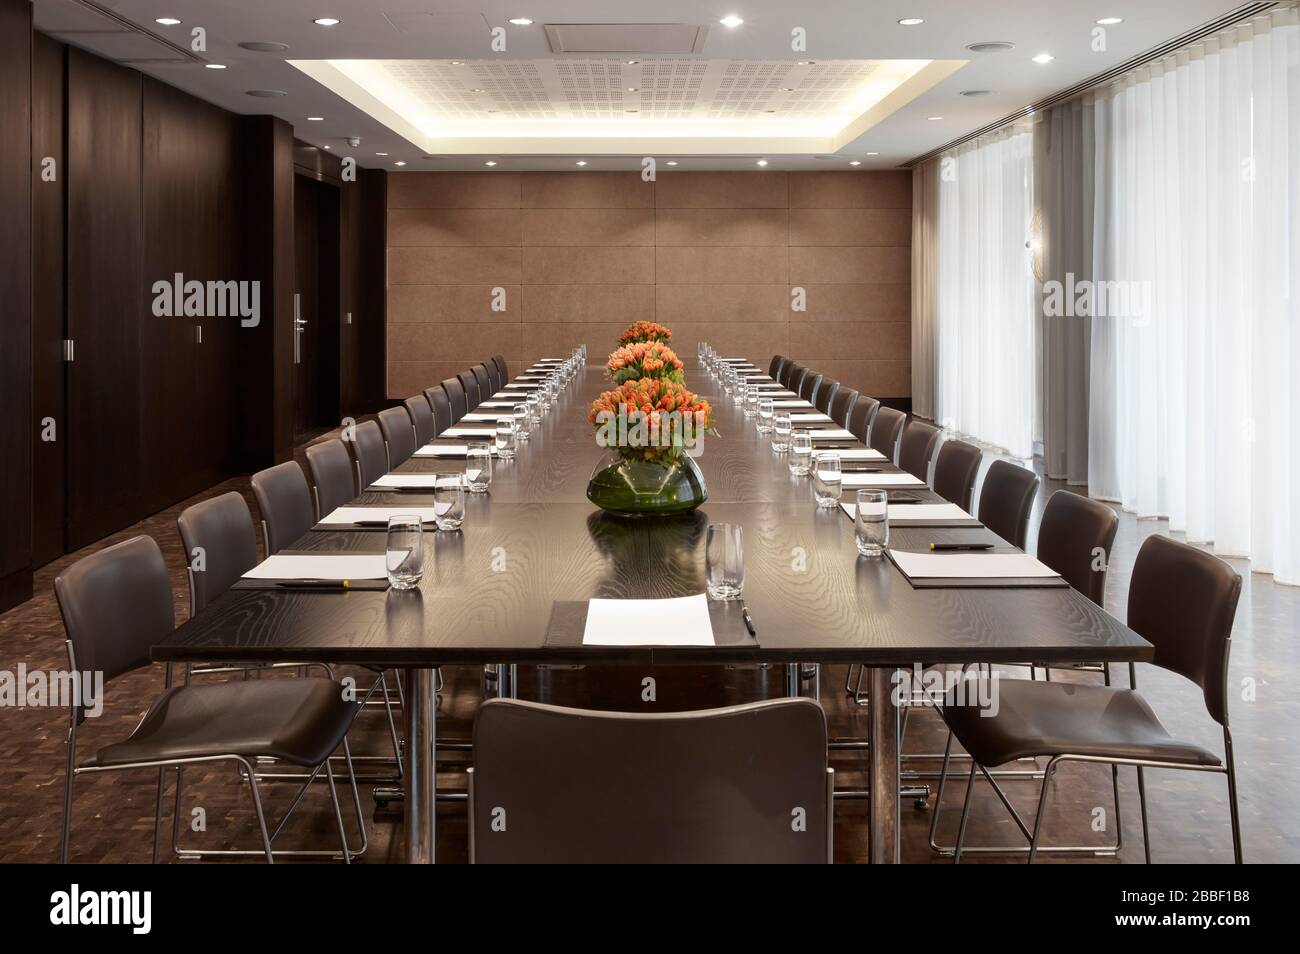 large meeting room, conference, executive, decision, board, chairs, discussion, clients, talk, talks, Stock Photo